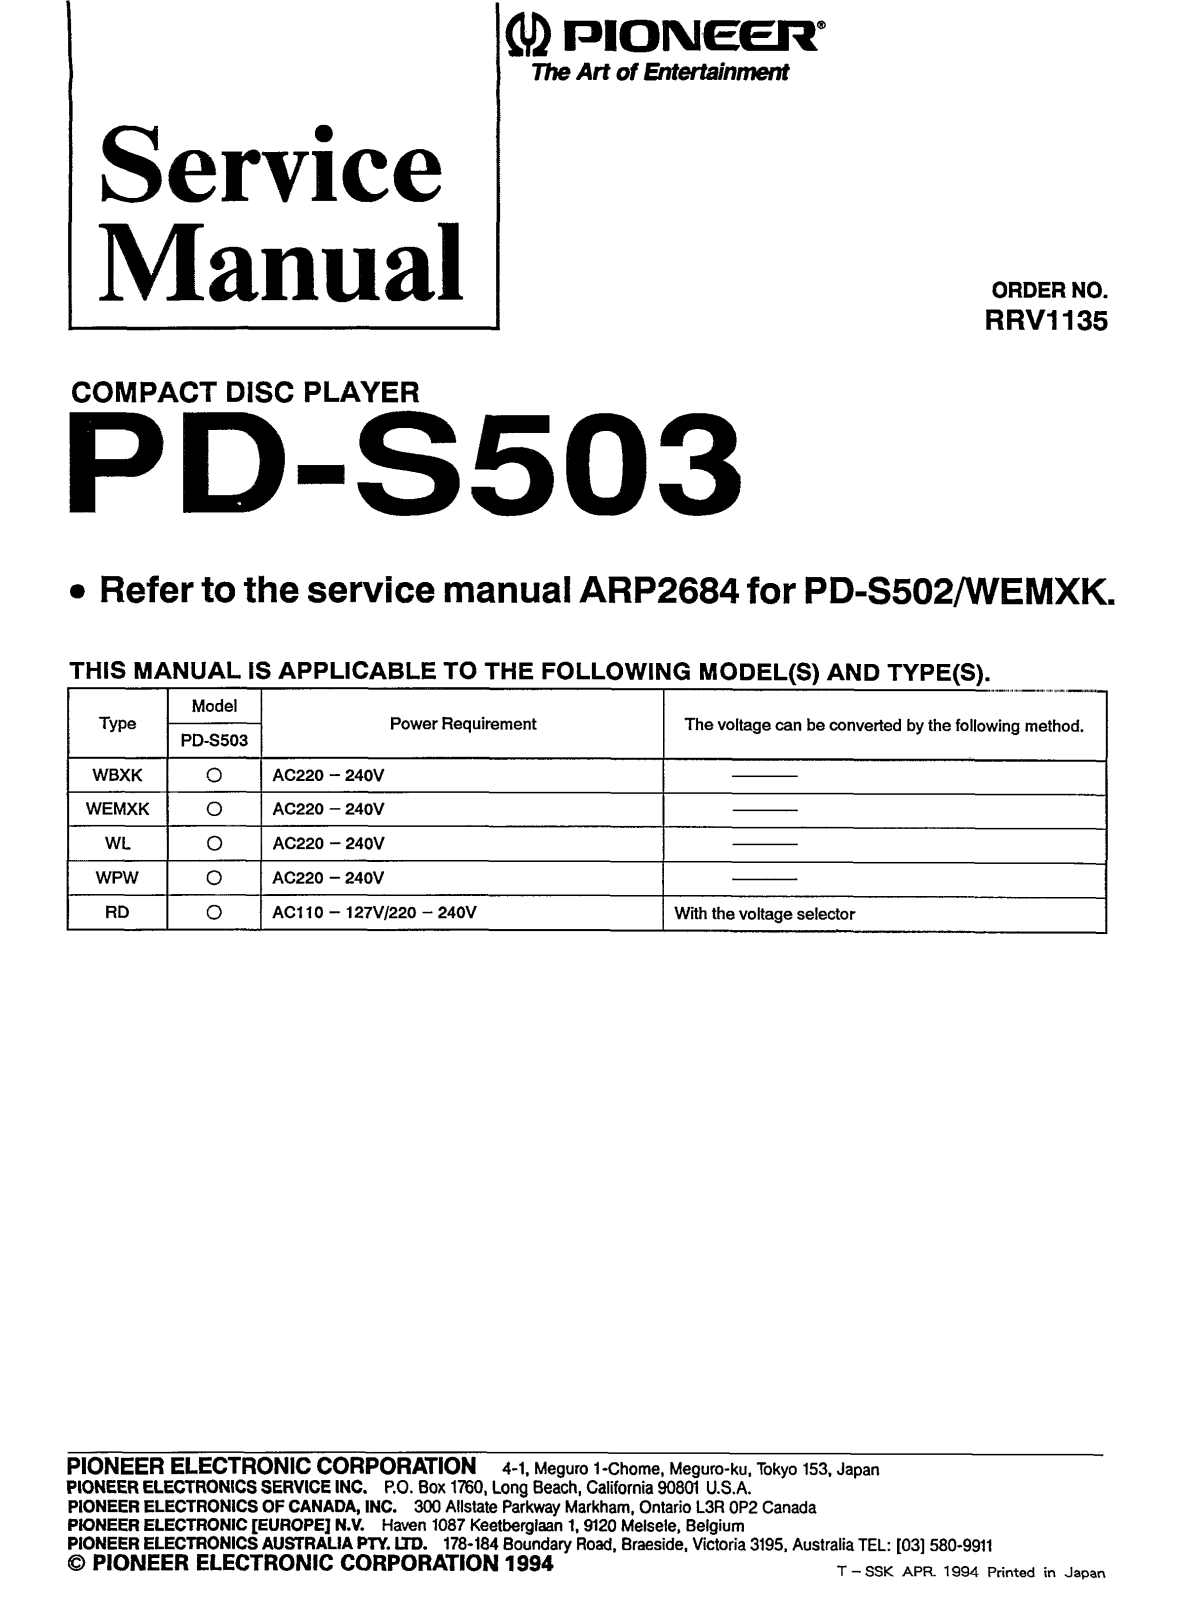 Pioneer PDS-503 Service manual